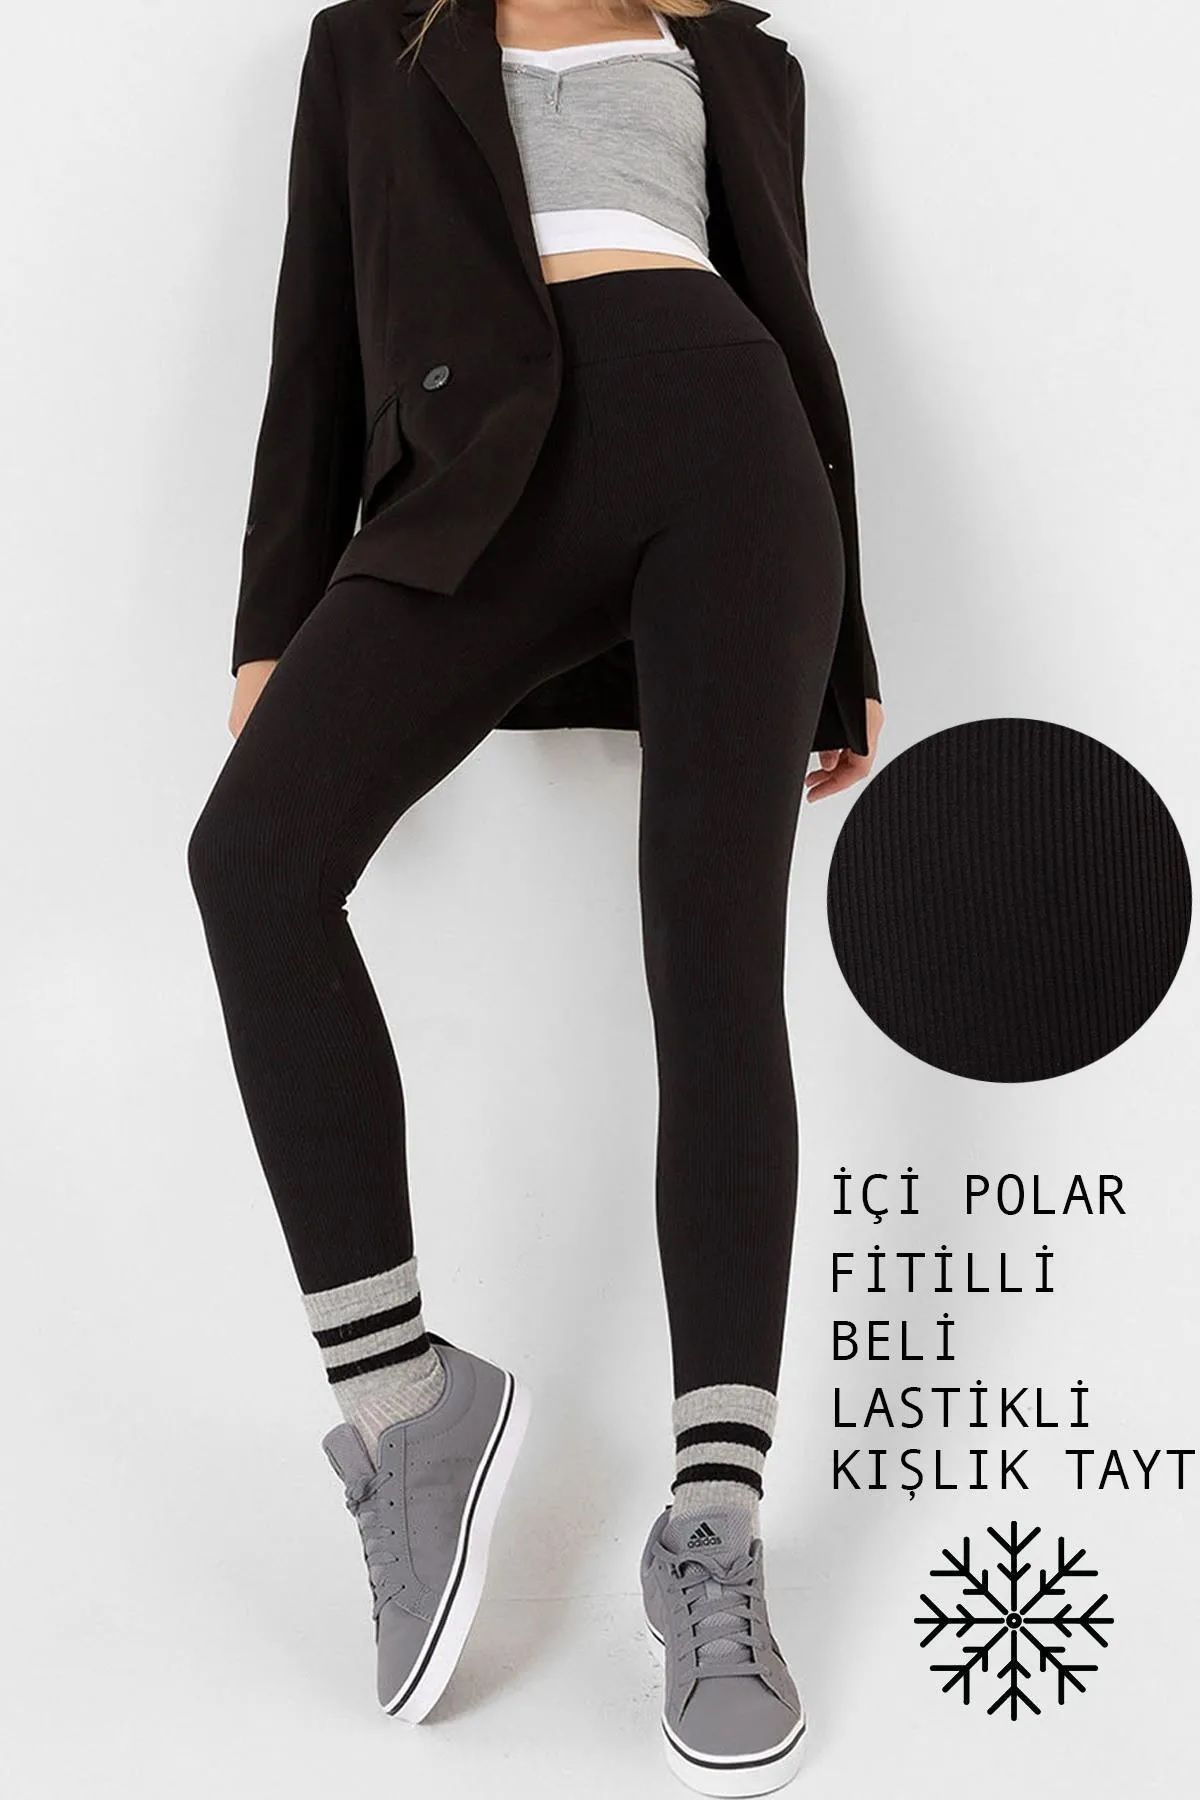 16 Black and White Striped Tights ideas